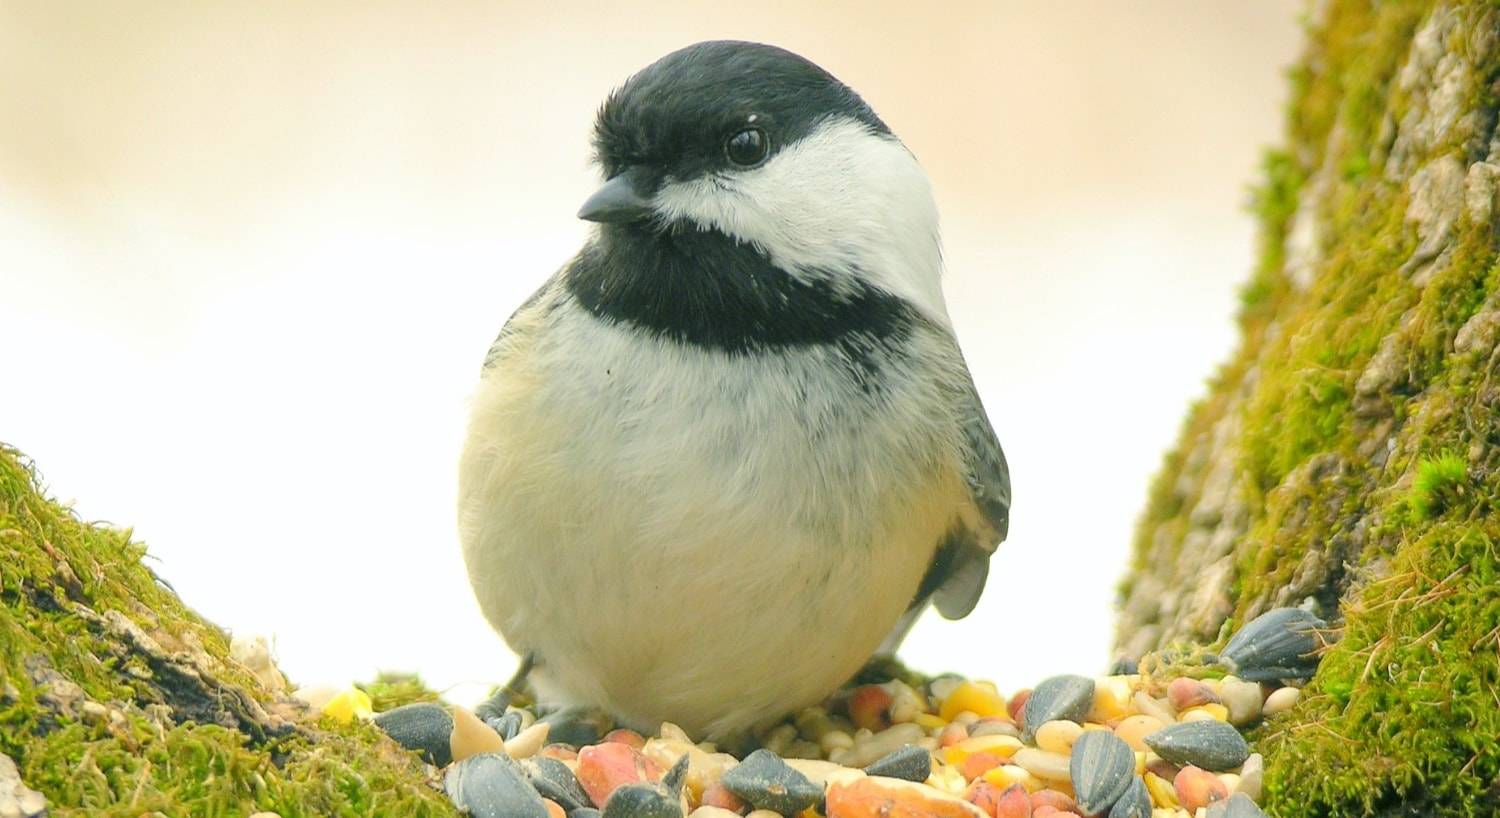 White and black bird sitting in a pile of seeds